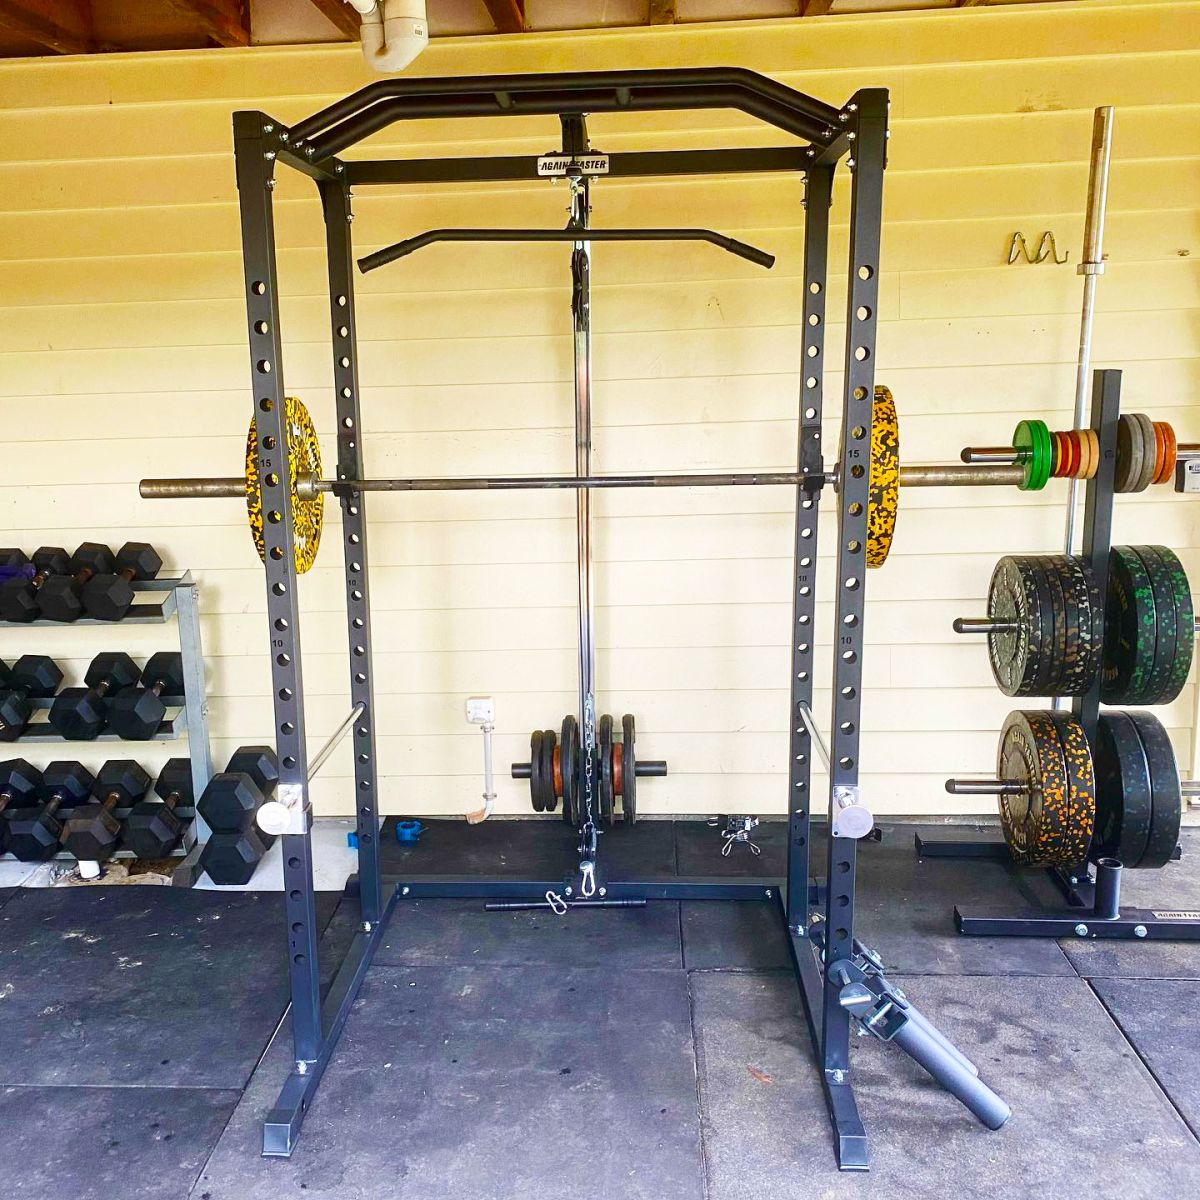 Ultimate Home Gym Set up by Caine Warburton